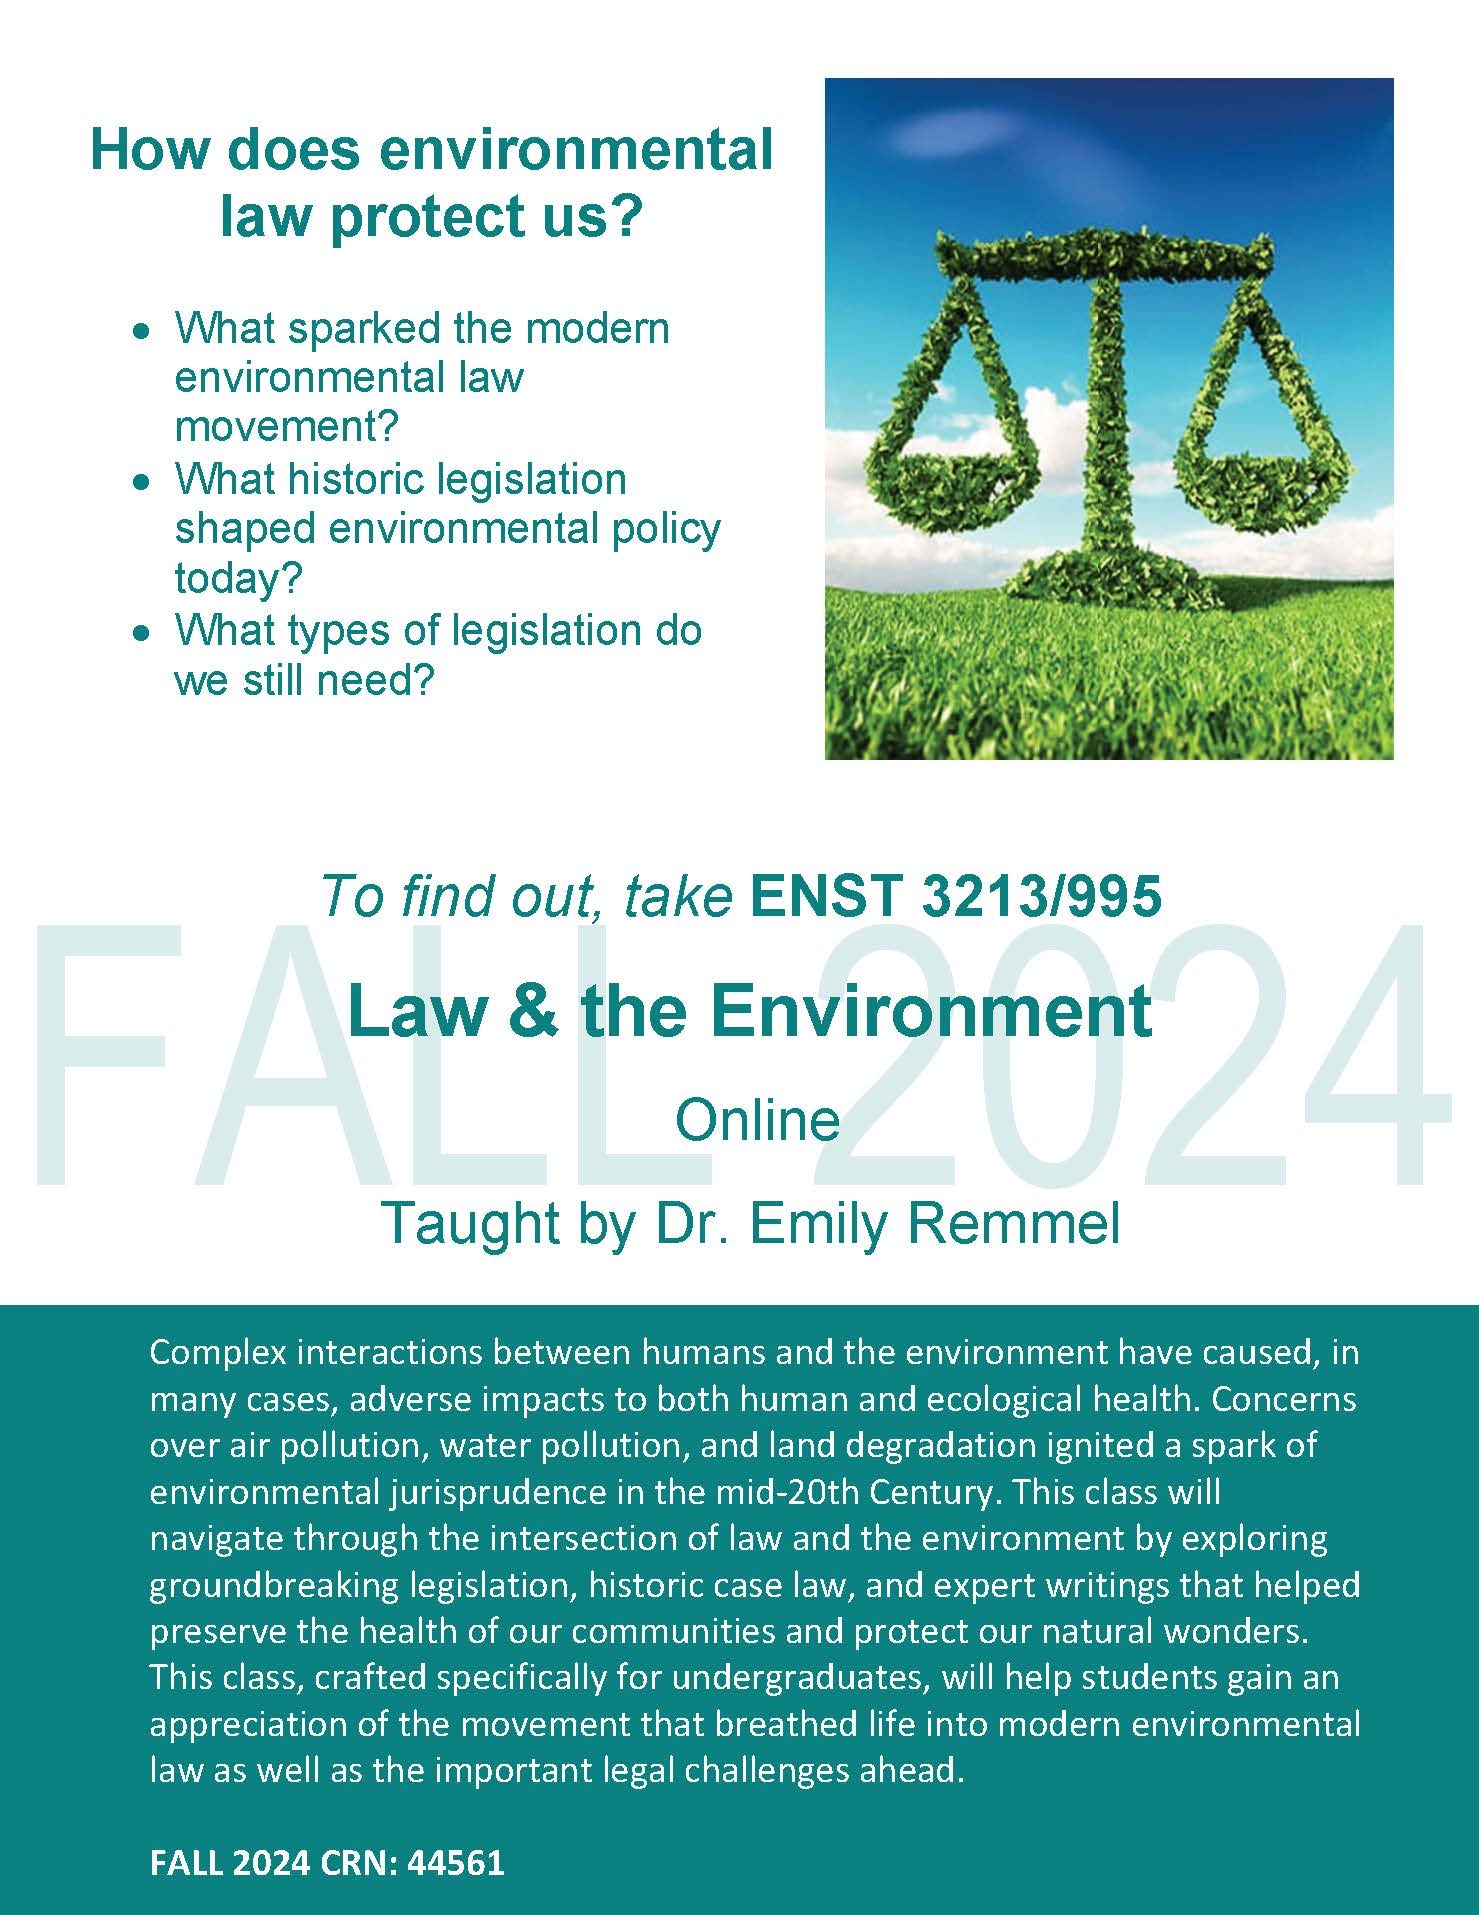 How does environmental law protect us? • What sparked the modern environmental law movement? • What historic legislation shaped environmental policy today? • What types of legislation do we still need? To find out, take ENST 3213/995 Law & the Environment Online Taught by Dr. Emily Remmel Complex interactions between humans and the environment have caused, in many cases, adverse impacts to both human and ecological health. Concerns over air pollution, water pollution, and land degradation ignited a spark of environmental jurisprudence in the mid-20th Century. This class will navigate through the intersection of law and the environment by exploring groundbreaking legislation, historic case law, and expert writings that helped preserve the health of our communities and protect our natural wonders. This class, crafted specifically for undergraduates, will help students gain an appreciation of the movement that breathed life into modern environmental law as well as the important legal challenges ahead. FALL 2024 CRN: 44561 FALL 2024